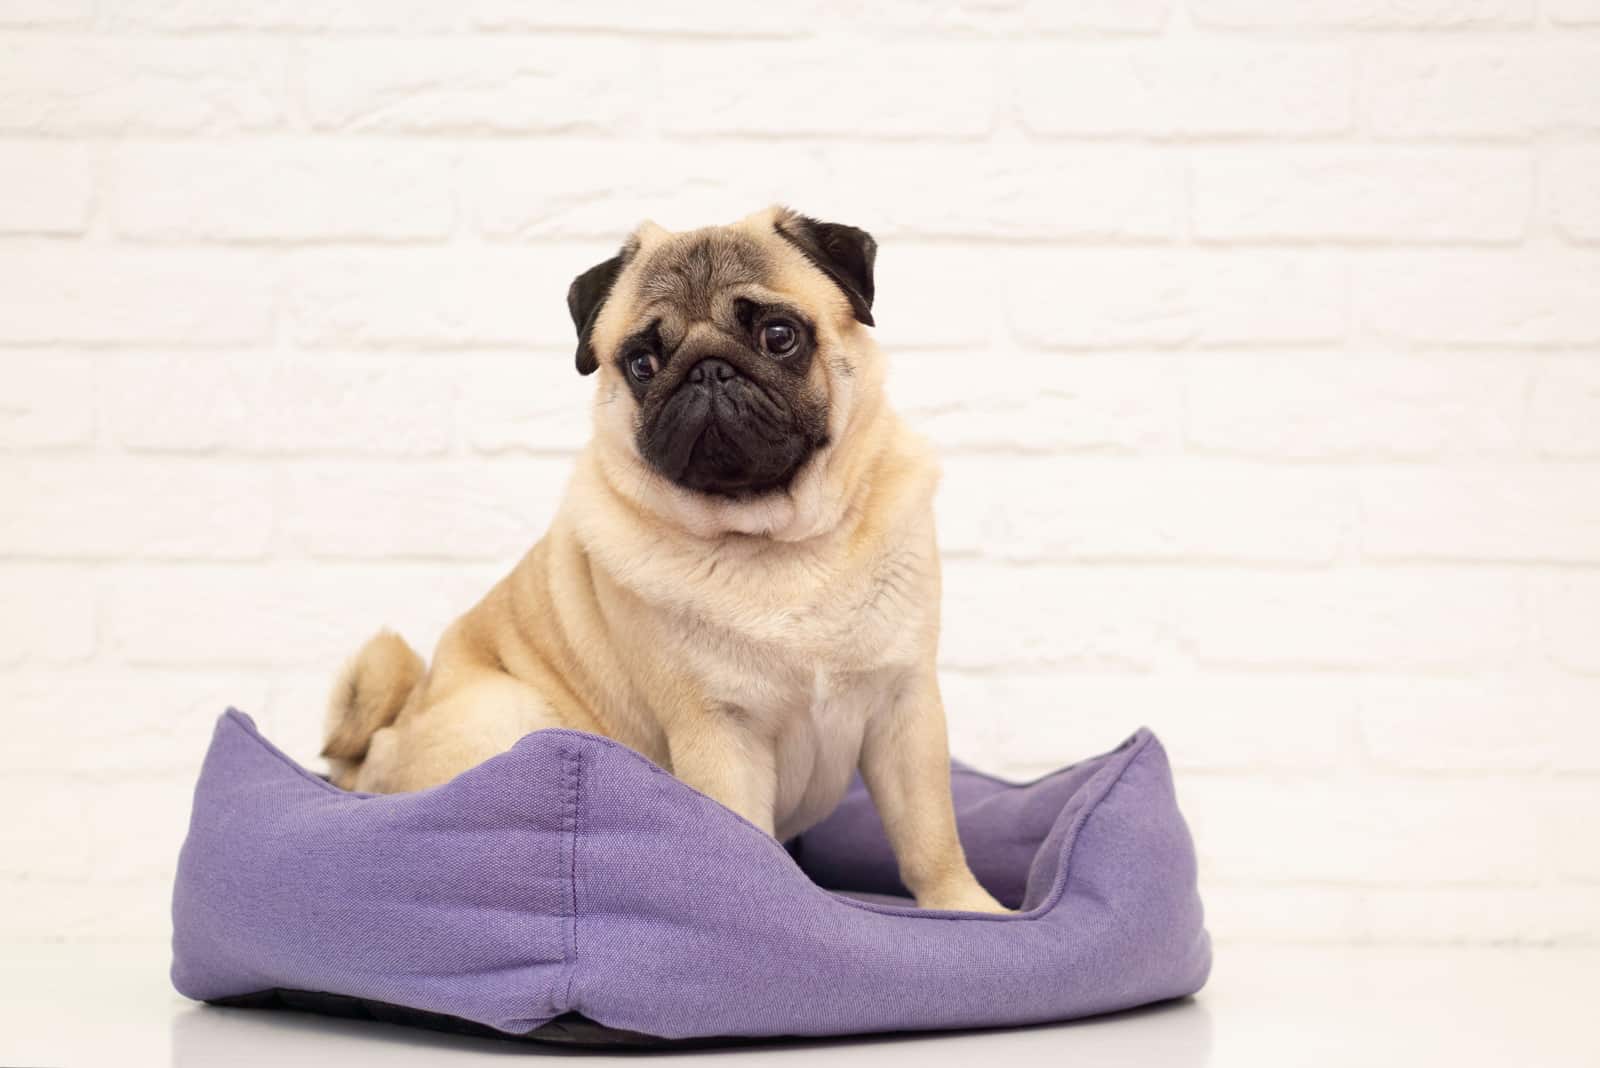 Cute pug dog in violet dog bed at home